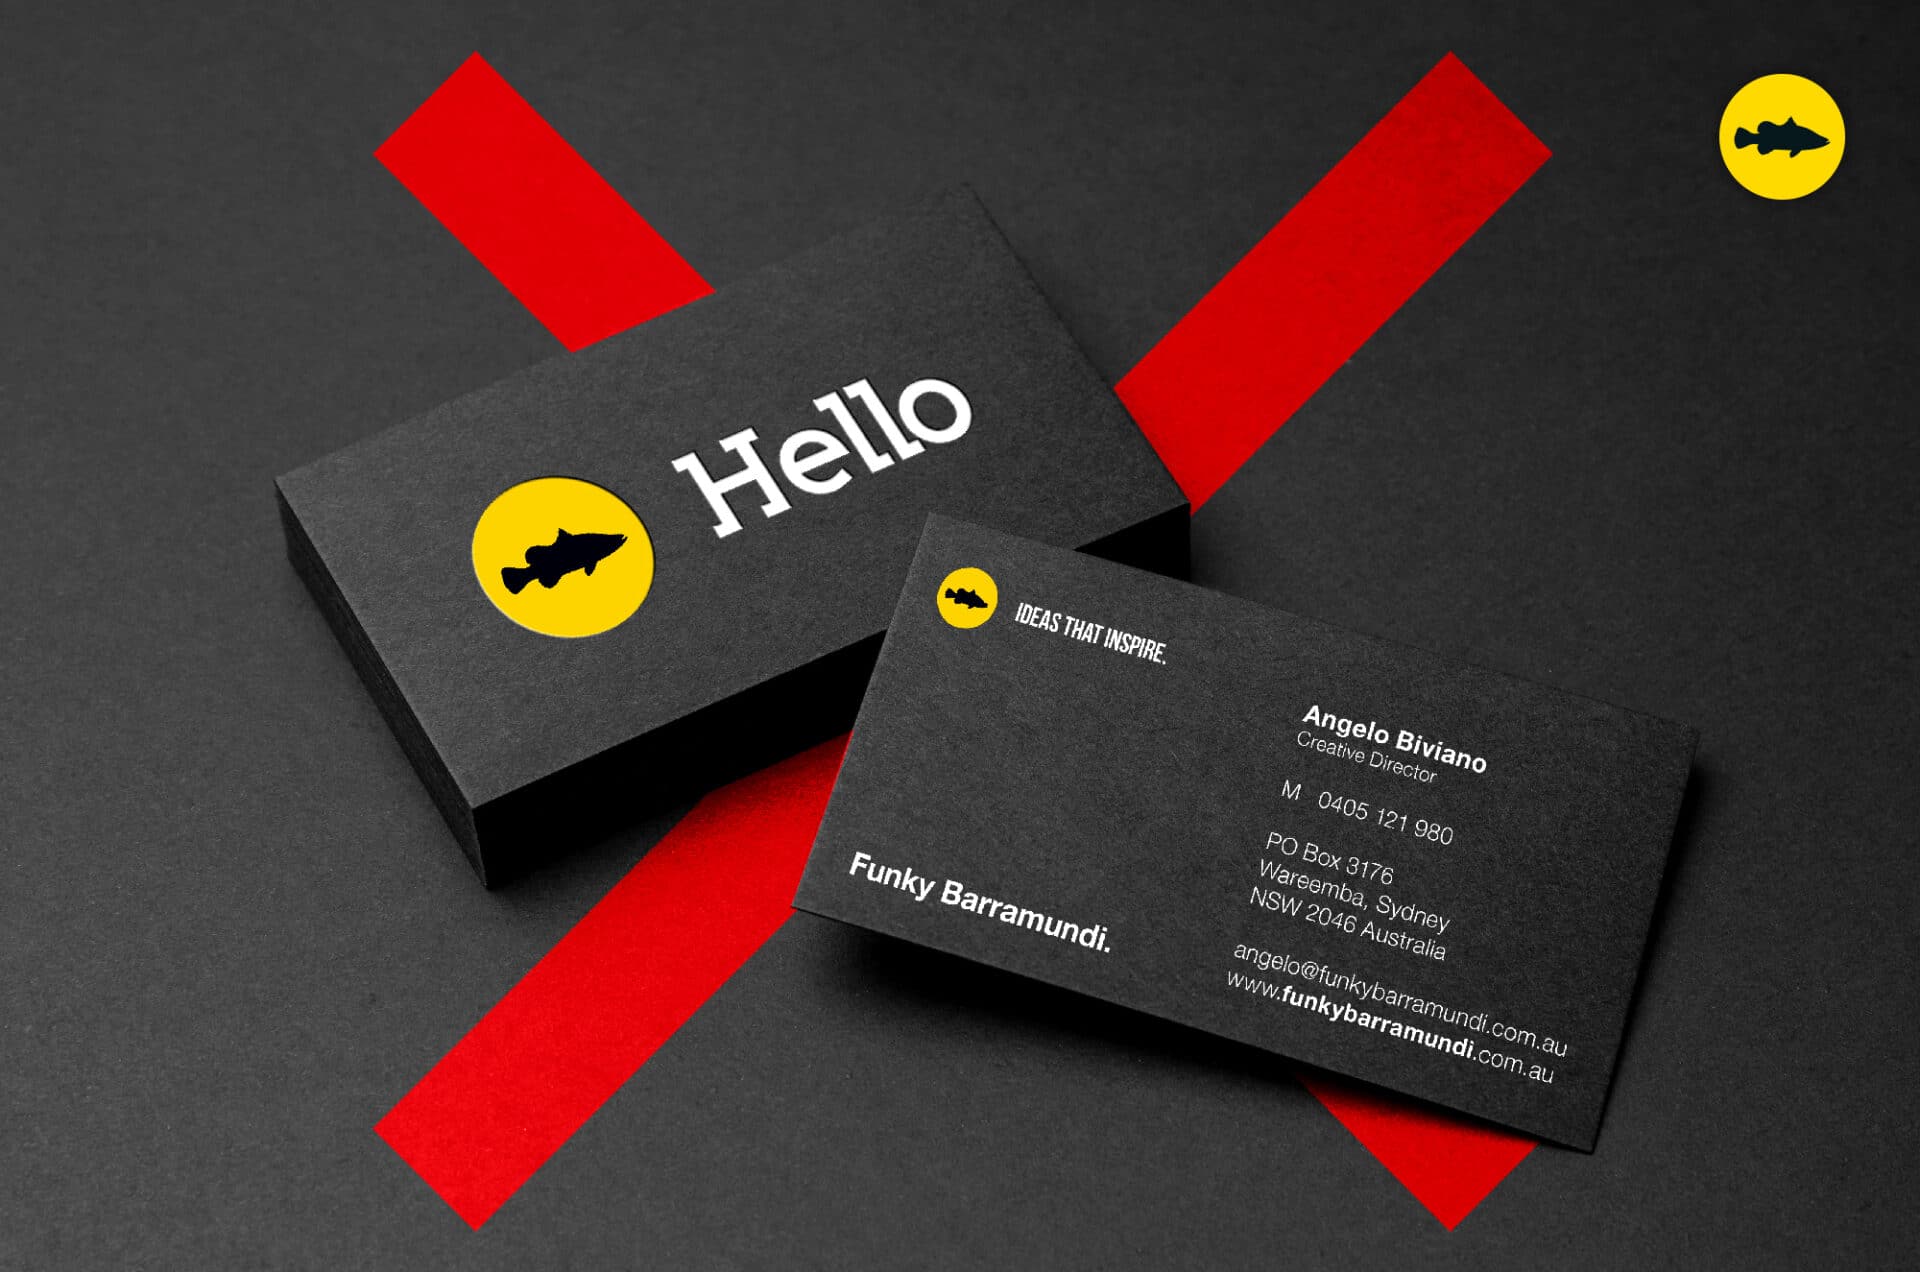 Are business cards still a thing?